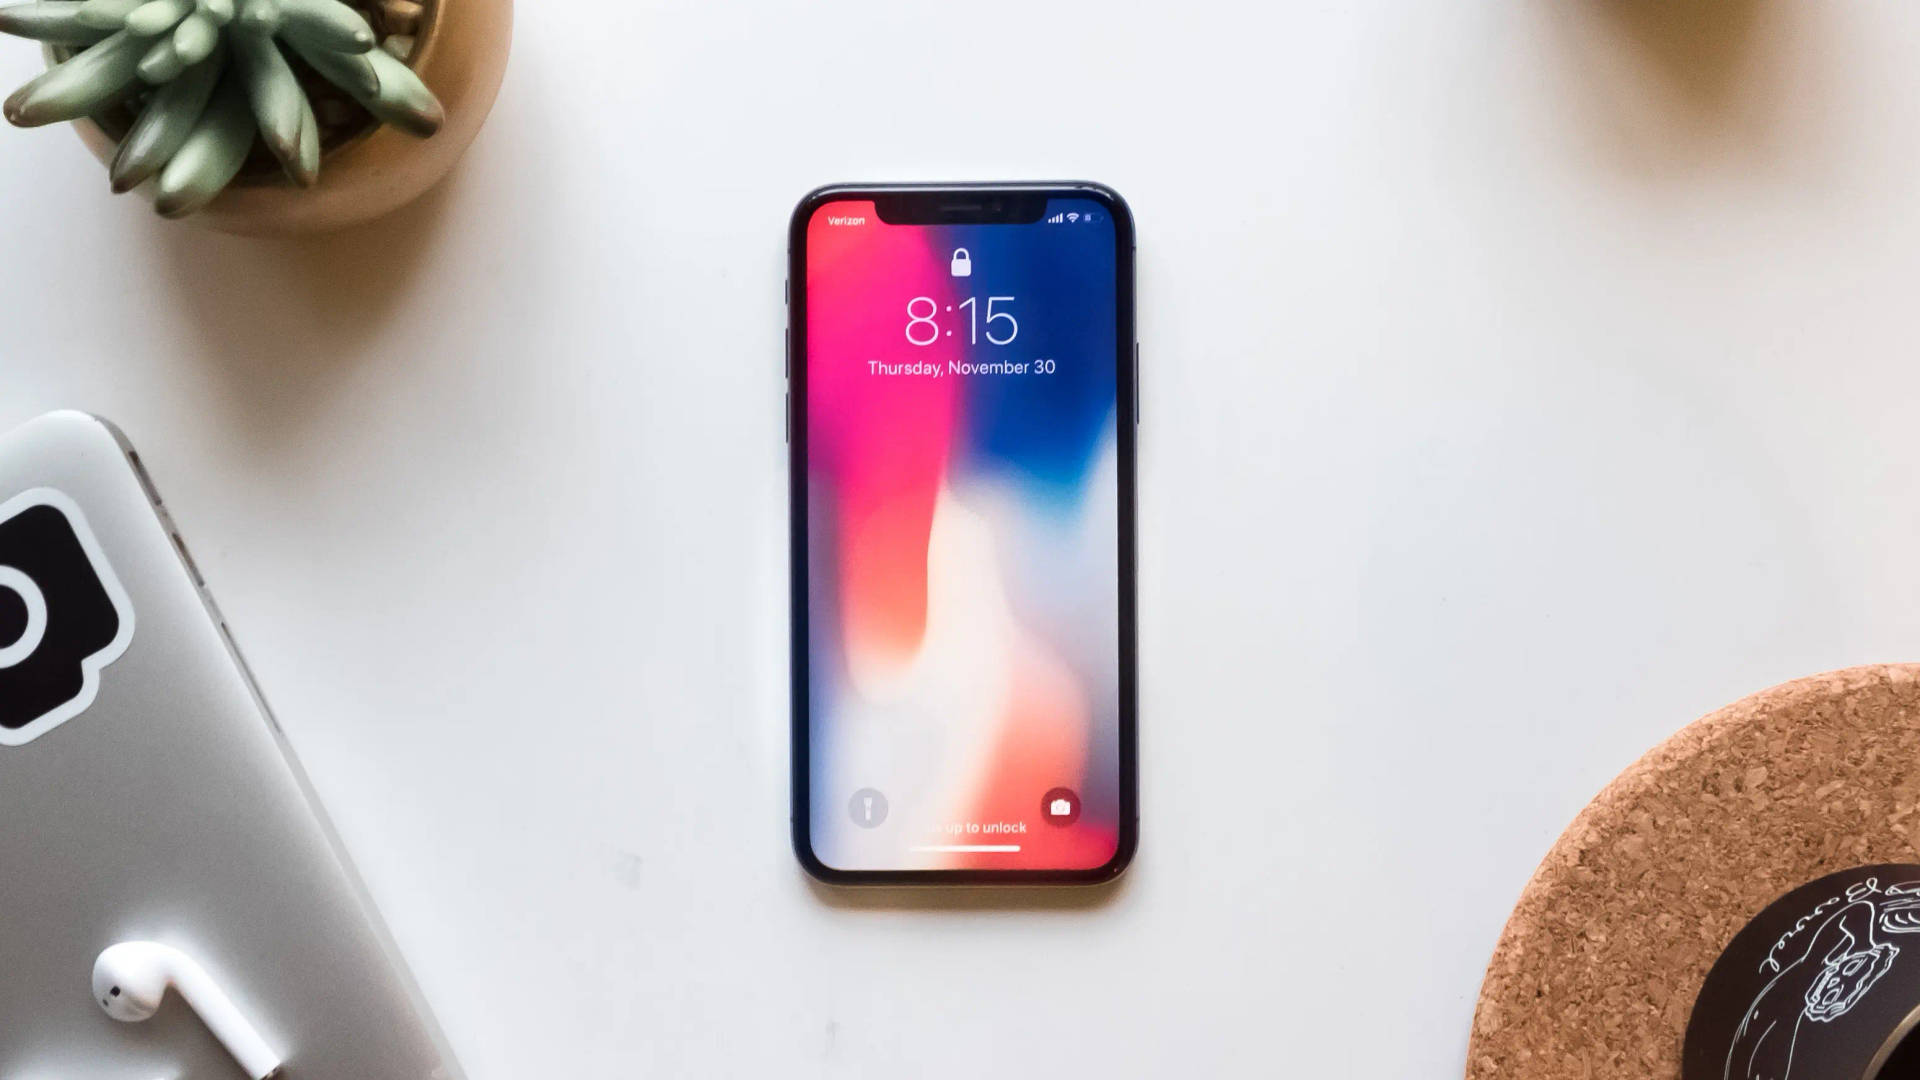 An Interesting Iphone - Stand Out from the Crowd Wallpaper